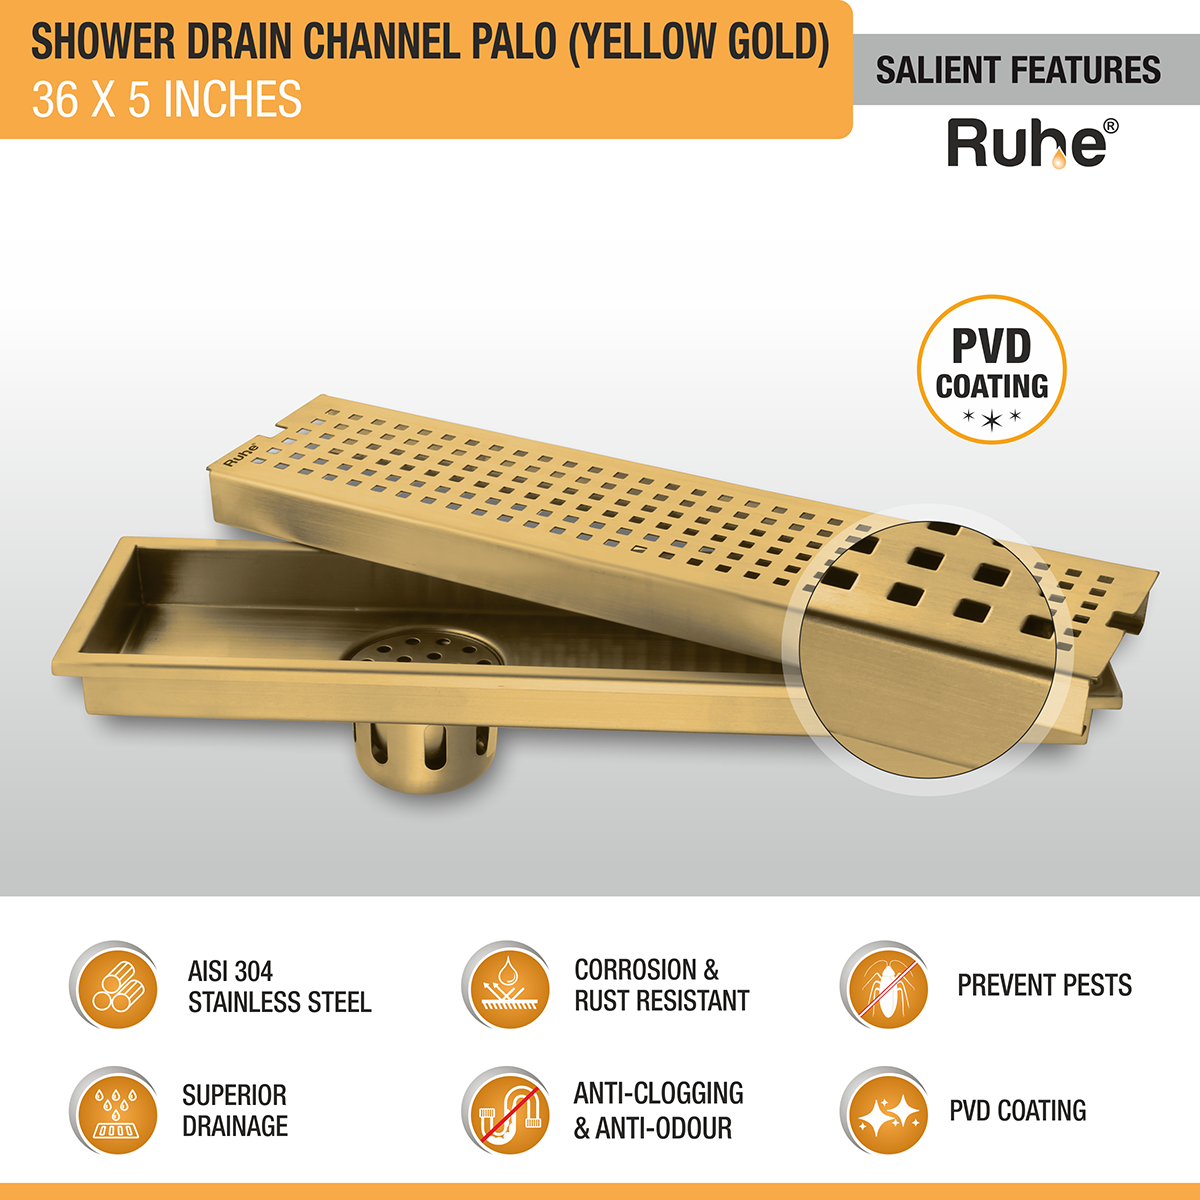 Palo Shower Drain Channel (36 x 5 Inches) YELLOW GOLD features